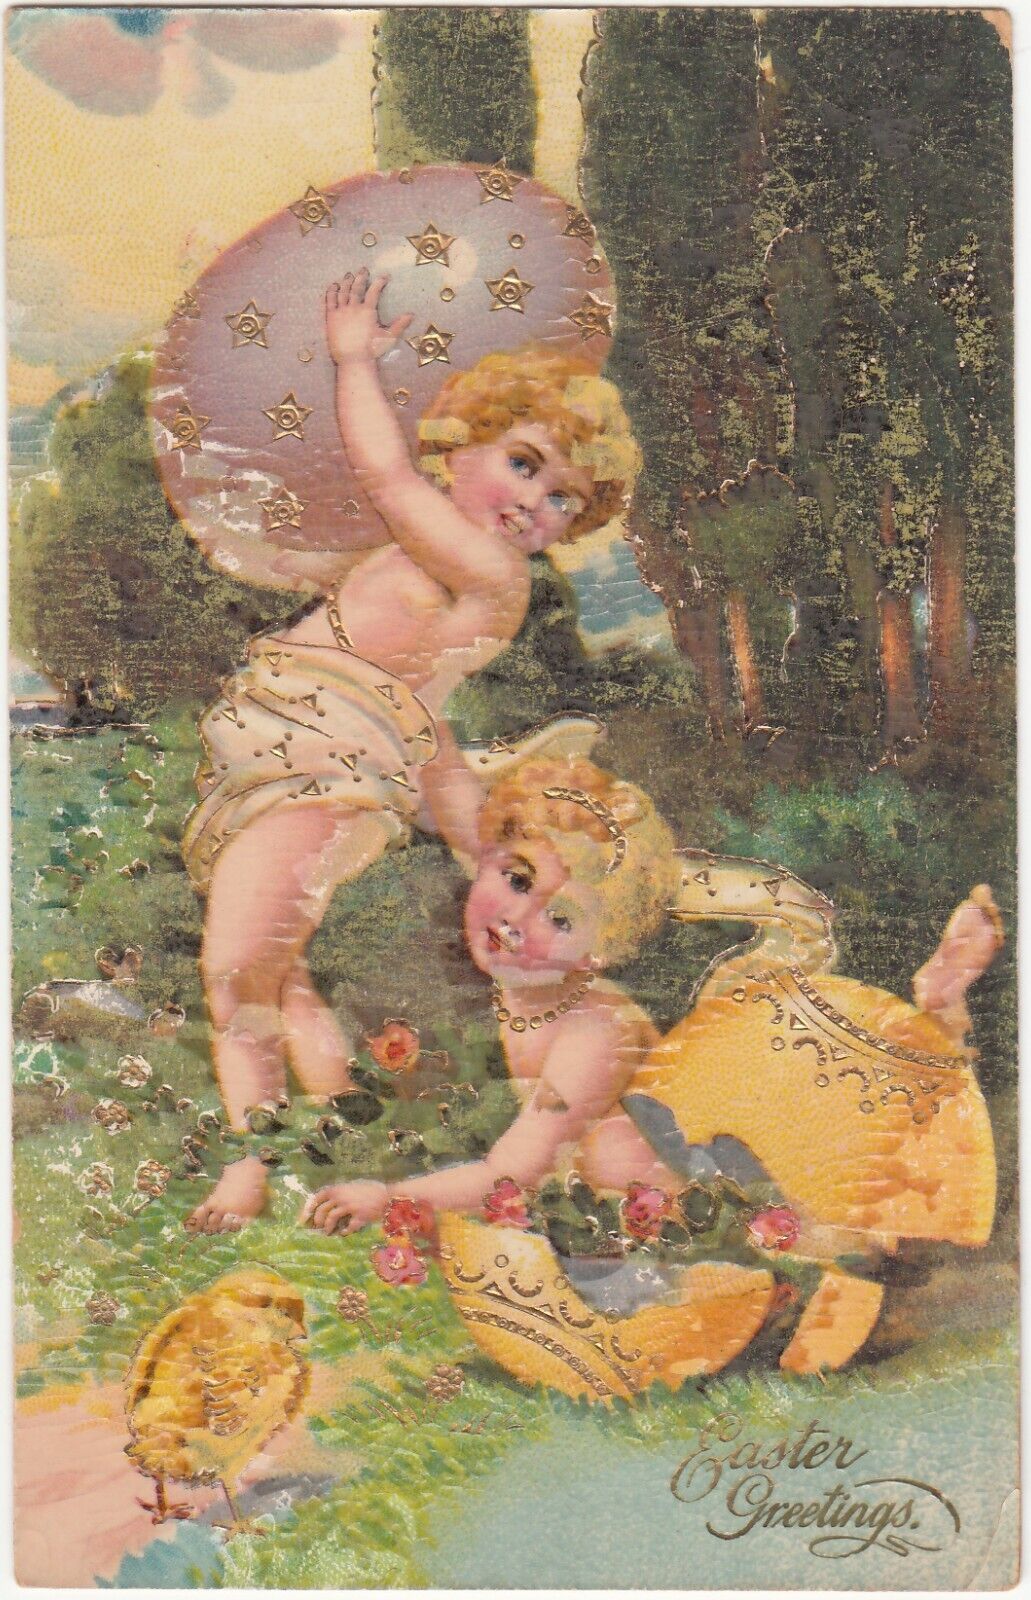 Easter Greetings. Children with Large Eggs and Chick. Vintage. RBF Ser# 9832